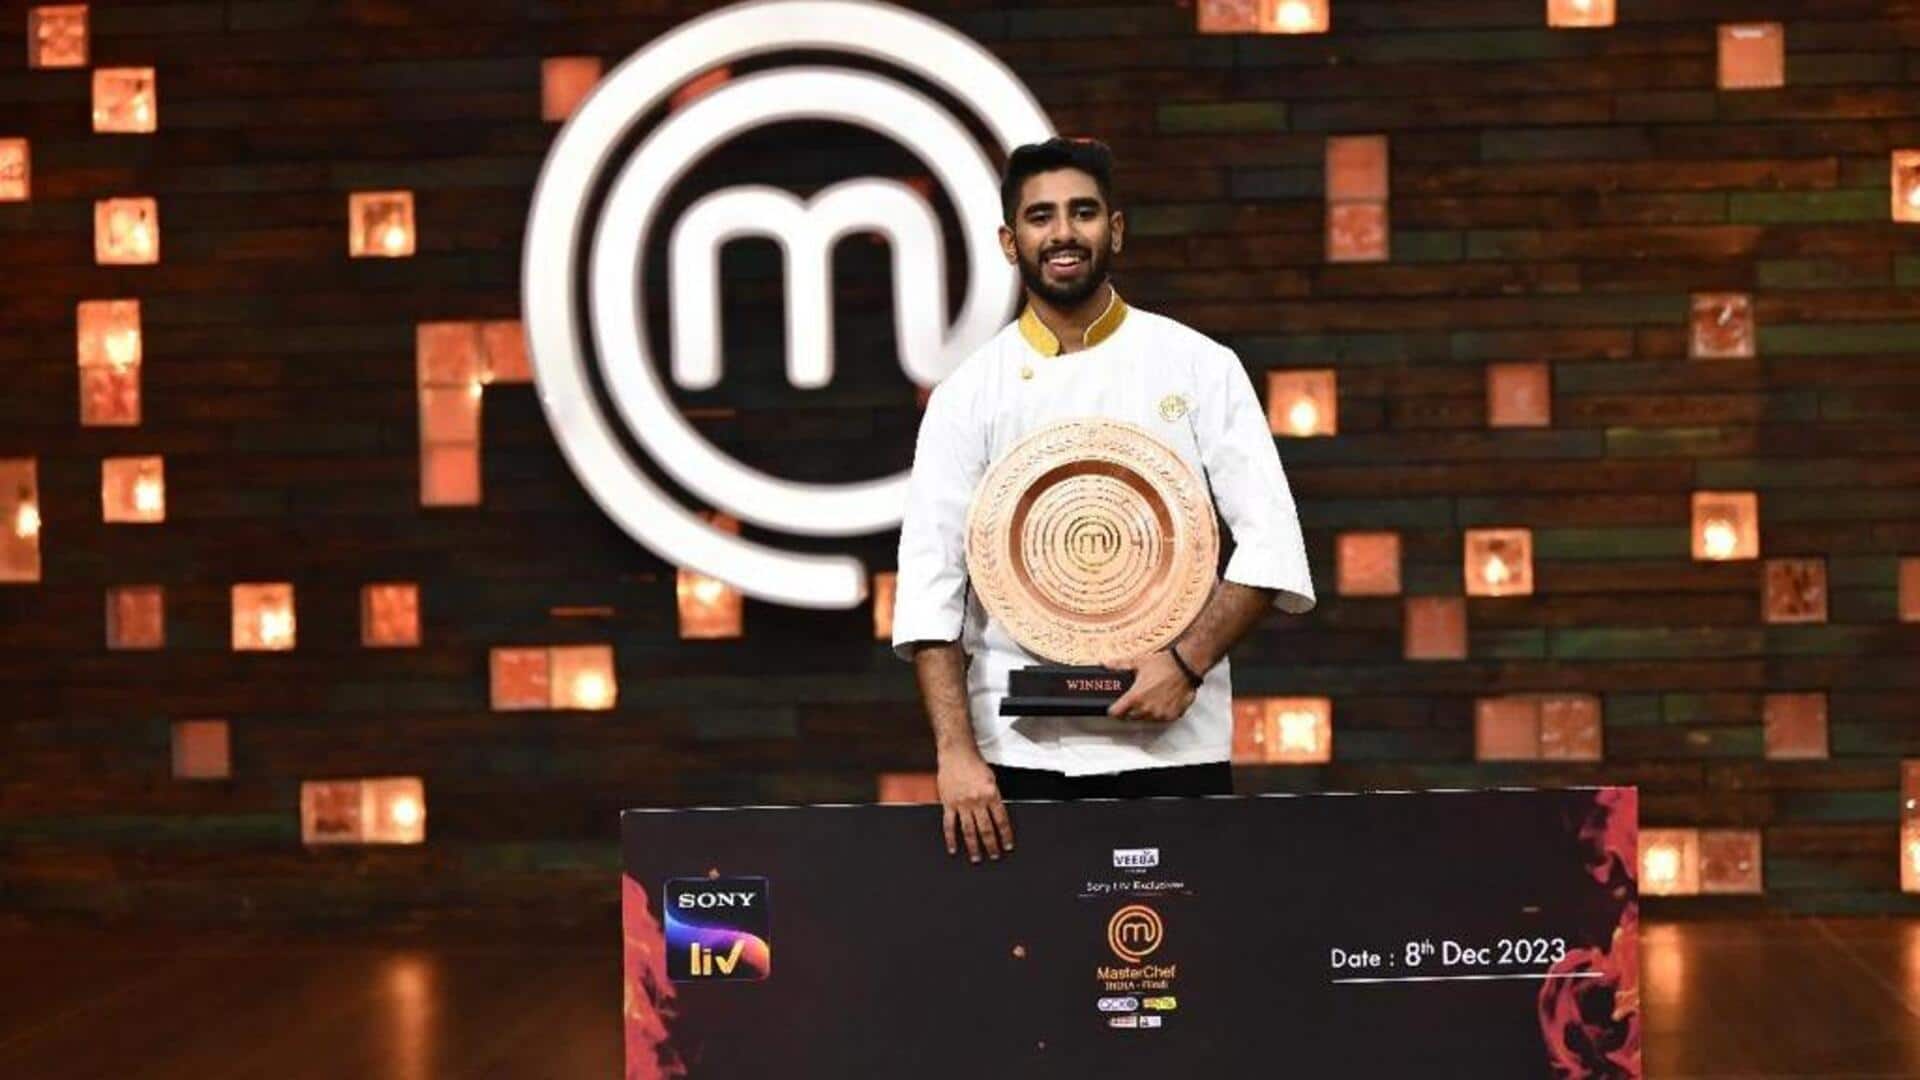 Exclusive: When 'MasterChef' winner Mohammed Ashiq decided not to audition